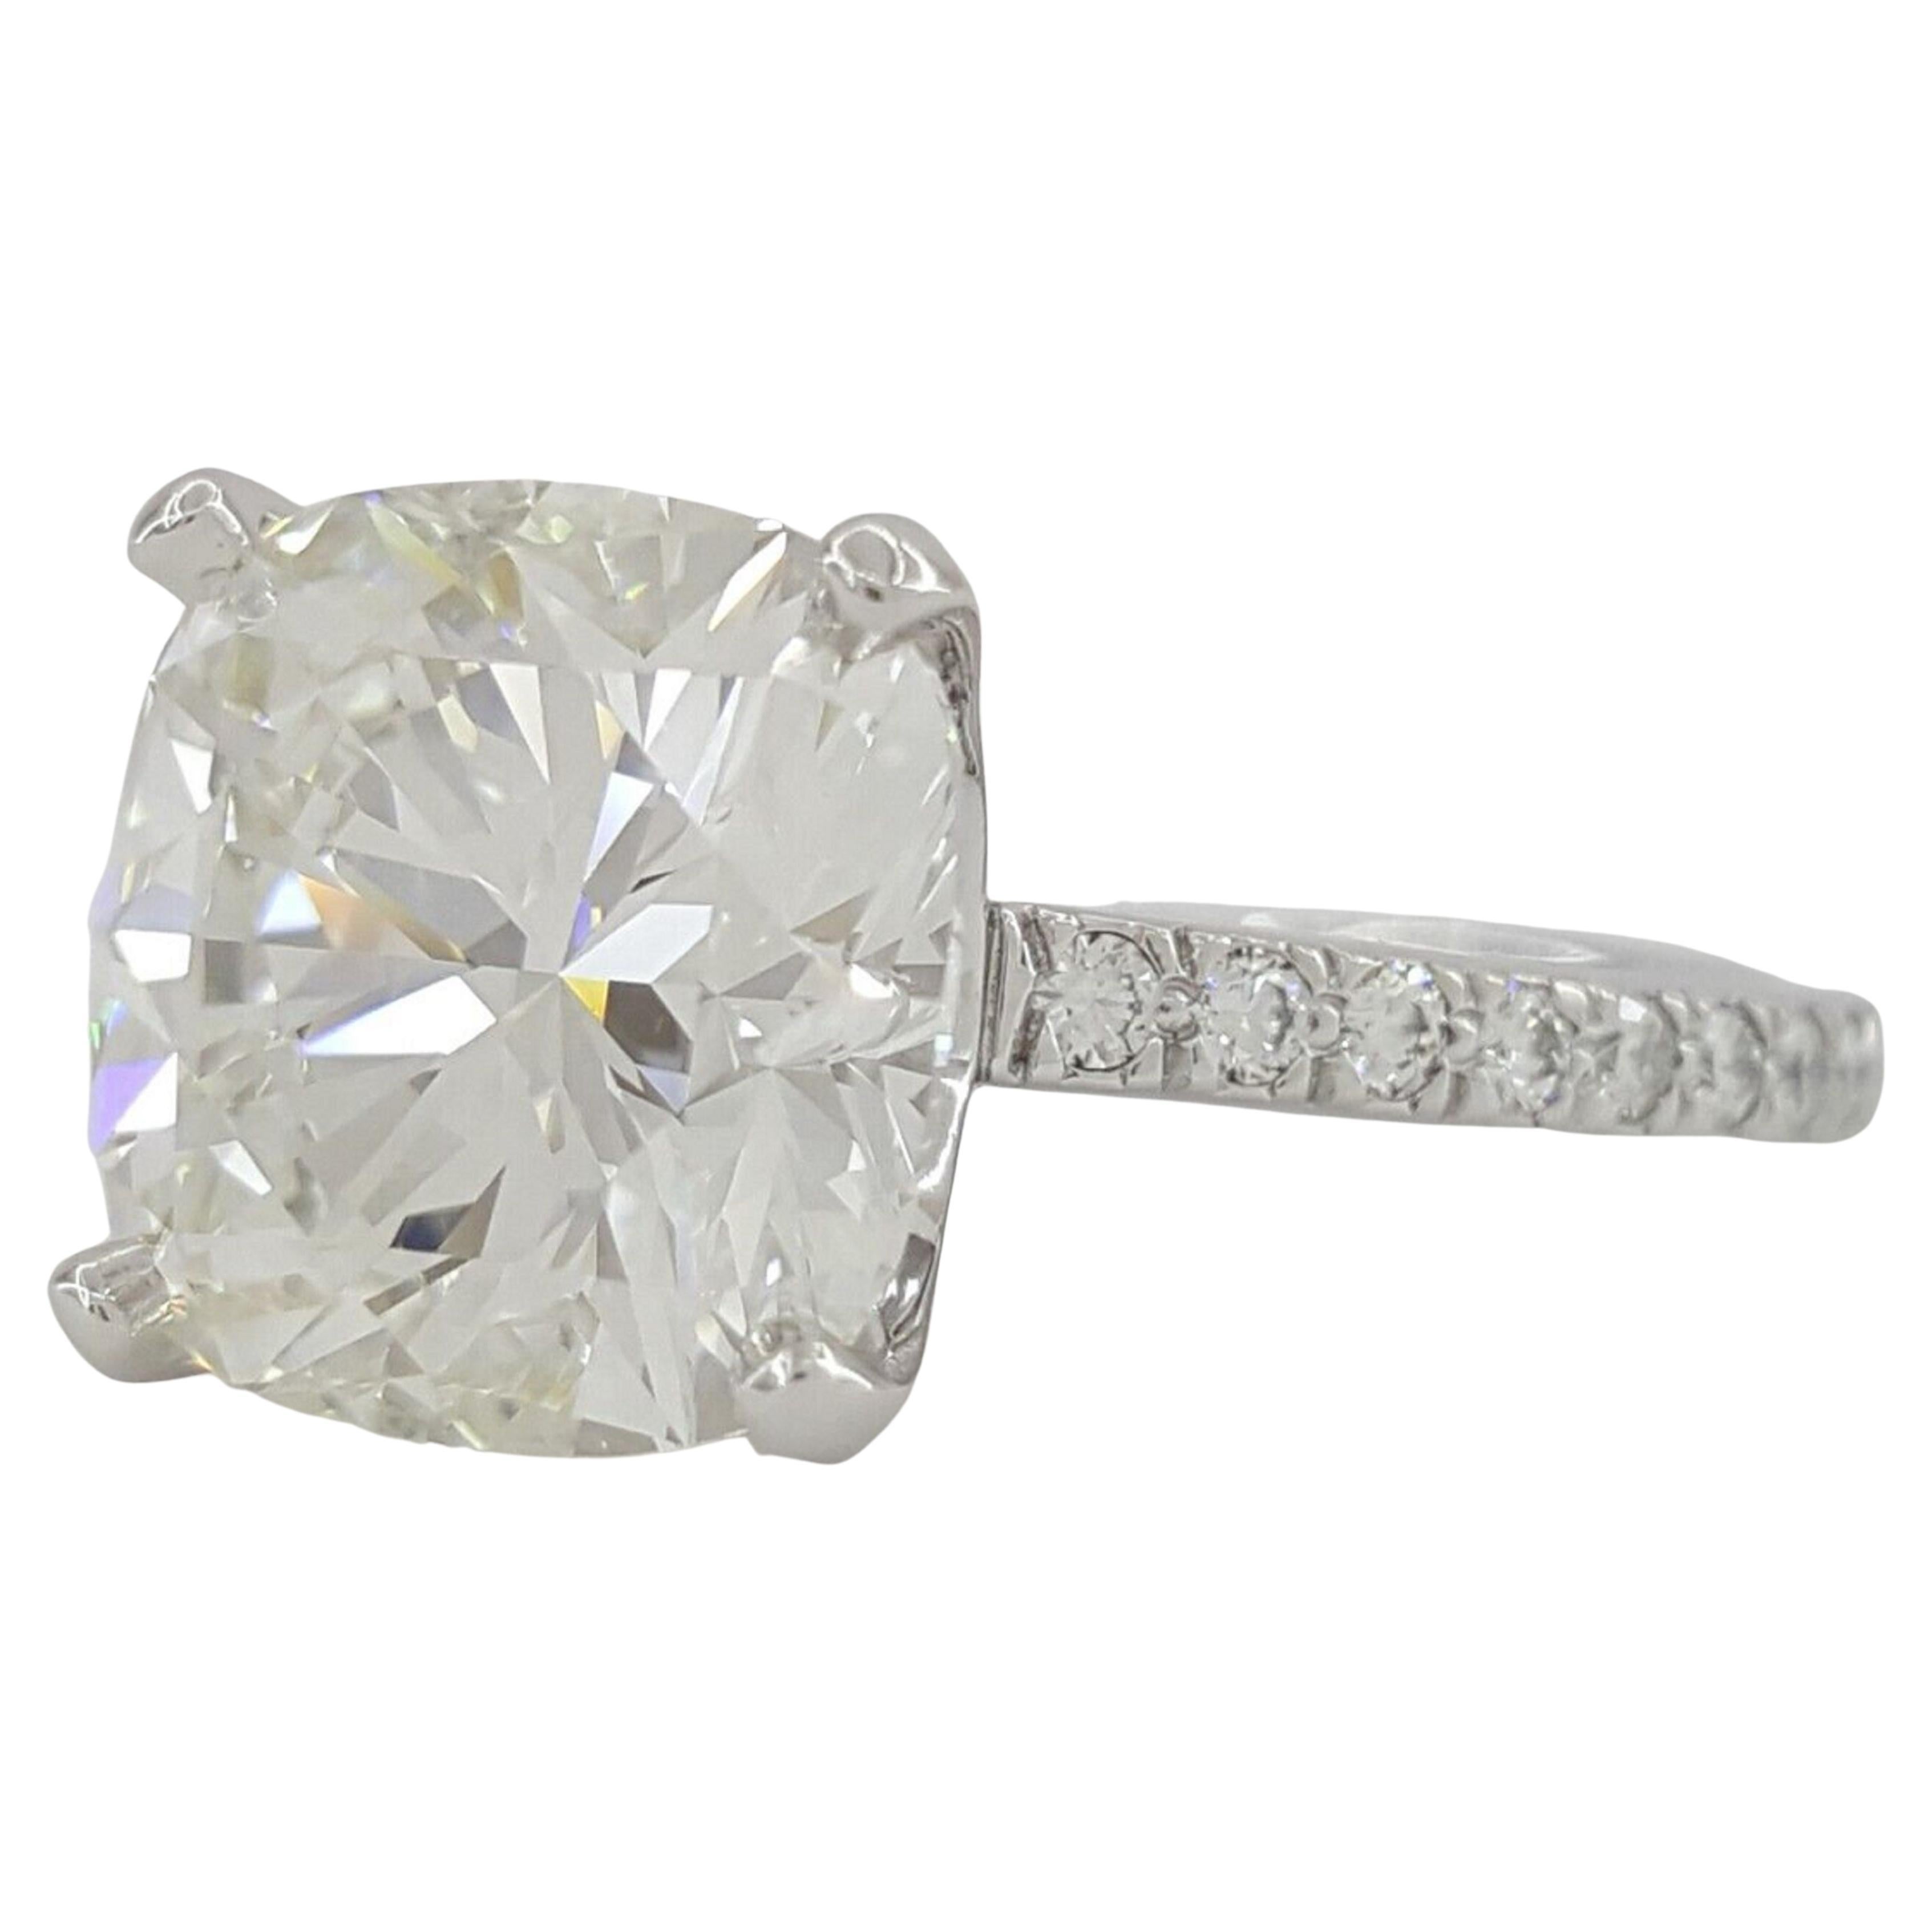 An exquisite brilliant cushion diamond with two tapered baguette diamonds and is mounted in solid platinum the total carat amount is 1 carats
the main stone weight is 4 carats
has F Color
vs2 Clarity


